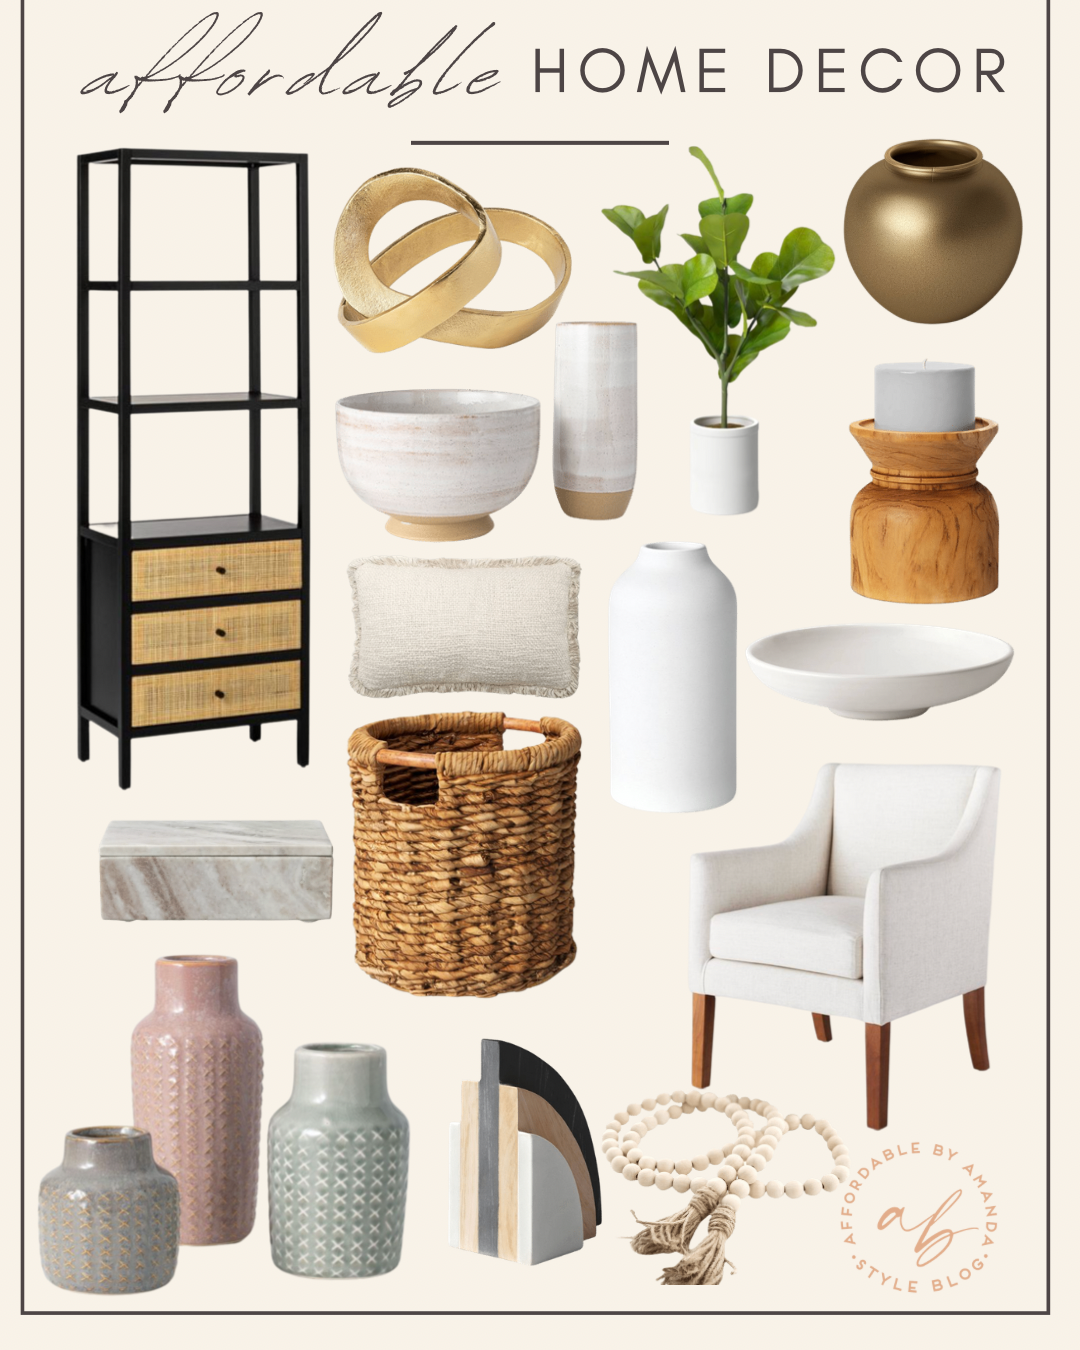 Target Home Decor Ideas: Spring 2021 - Affordable by Amanda